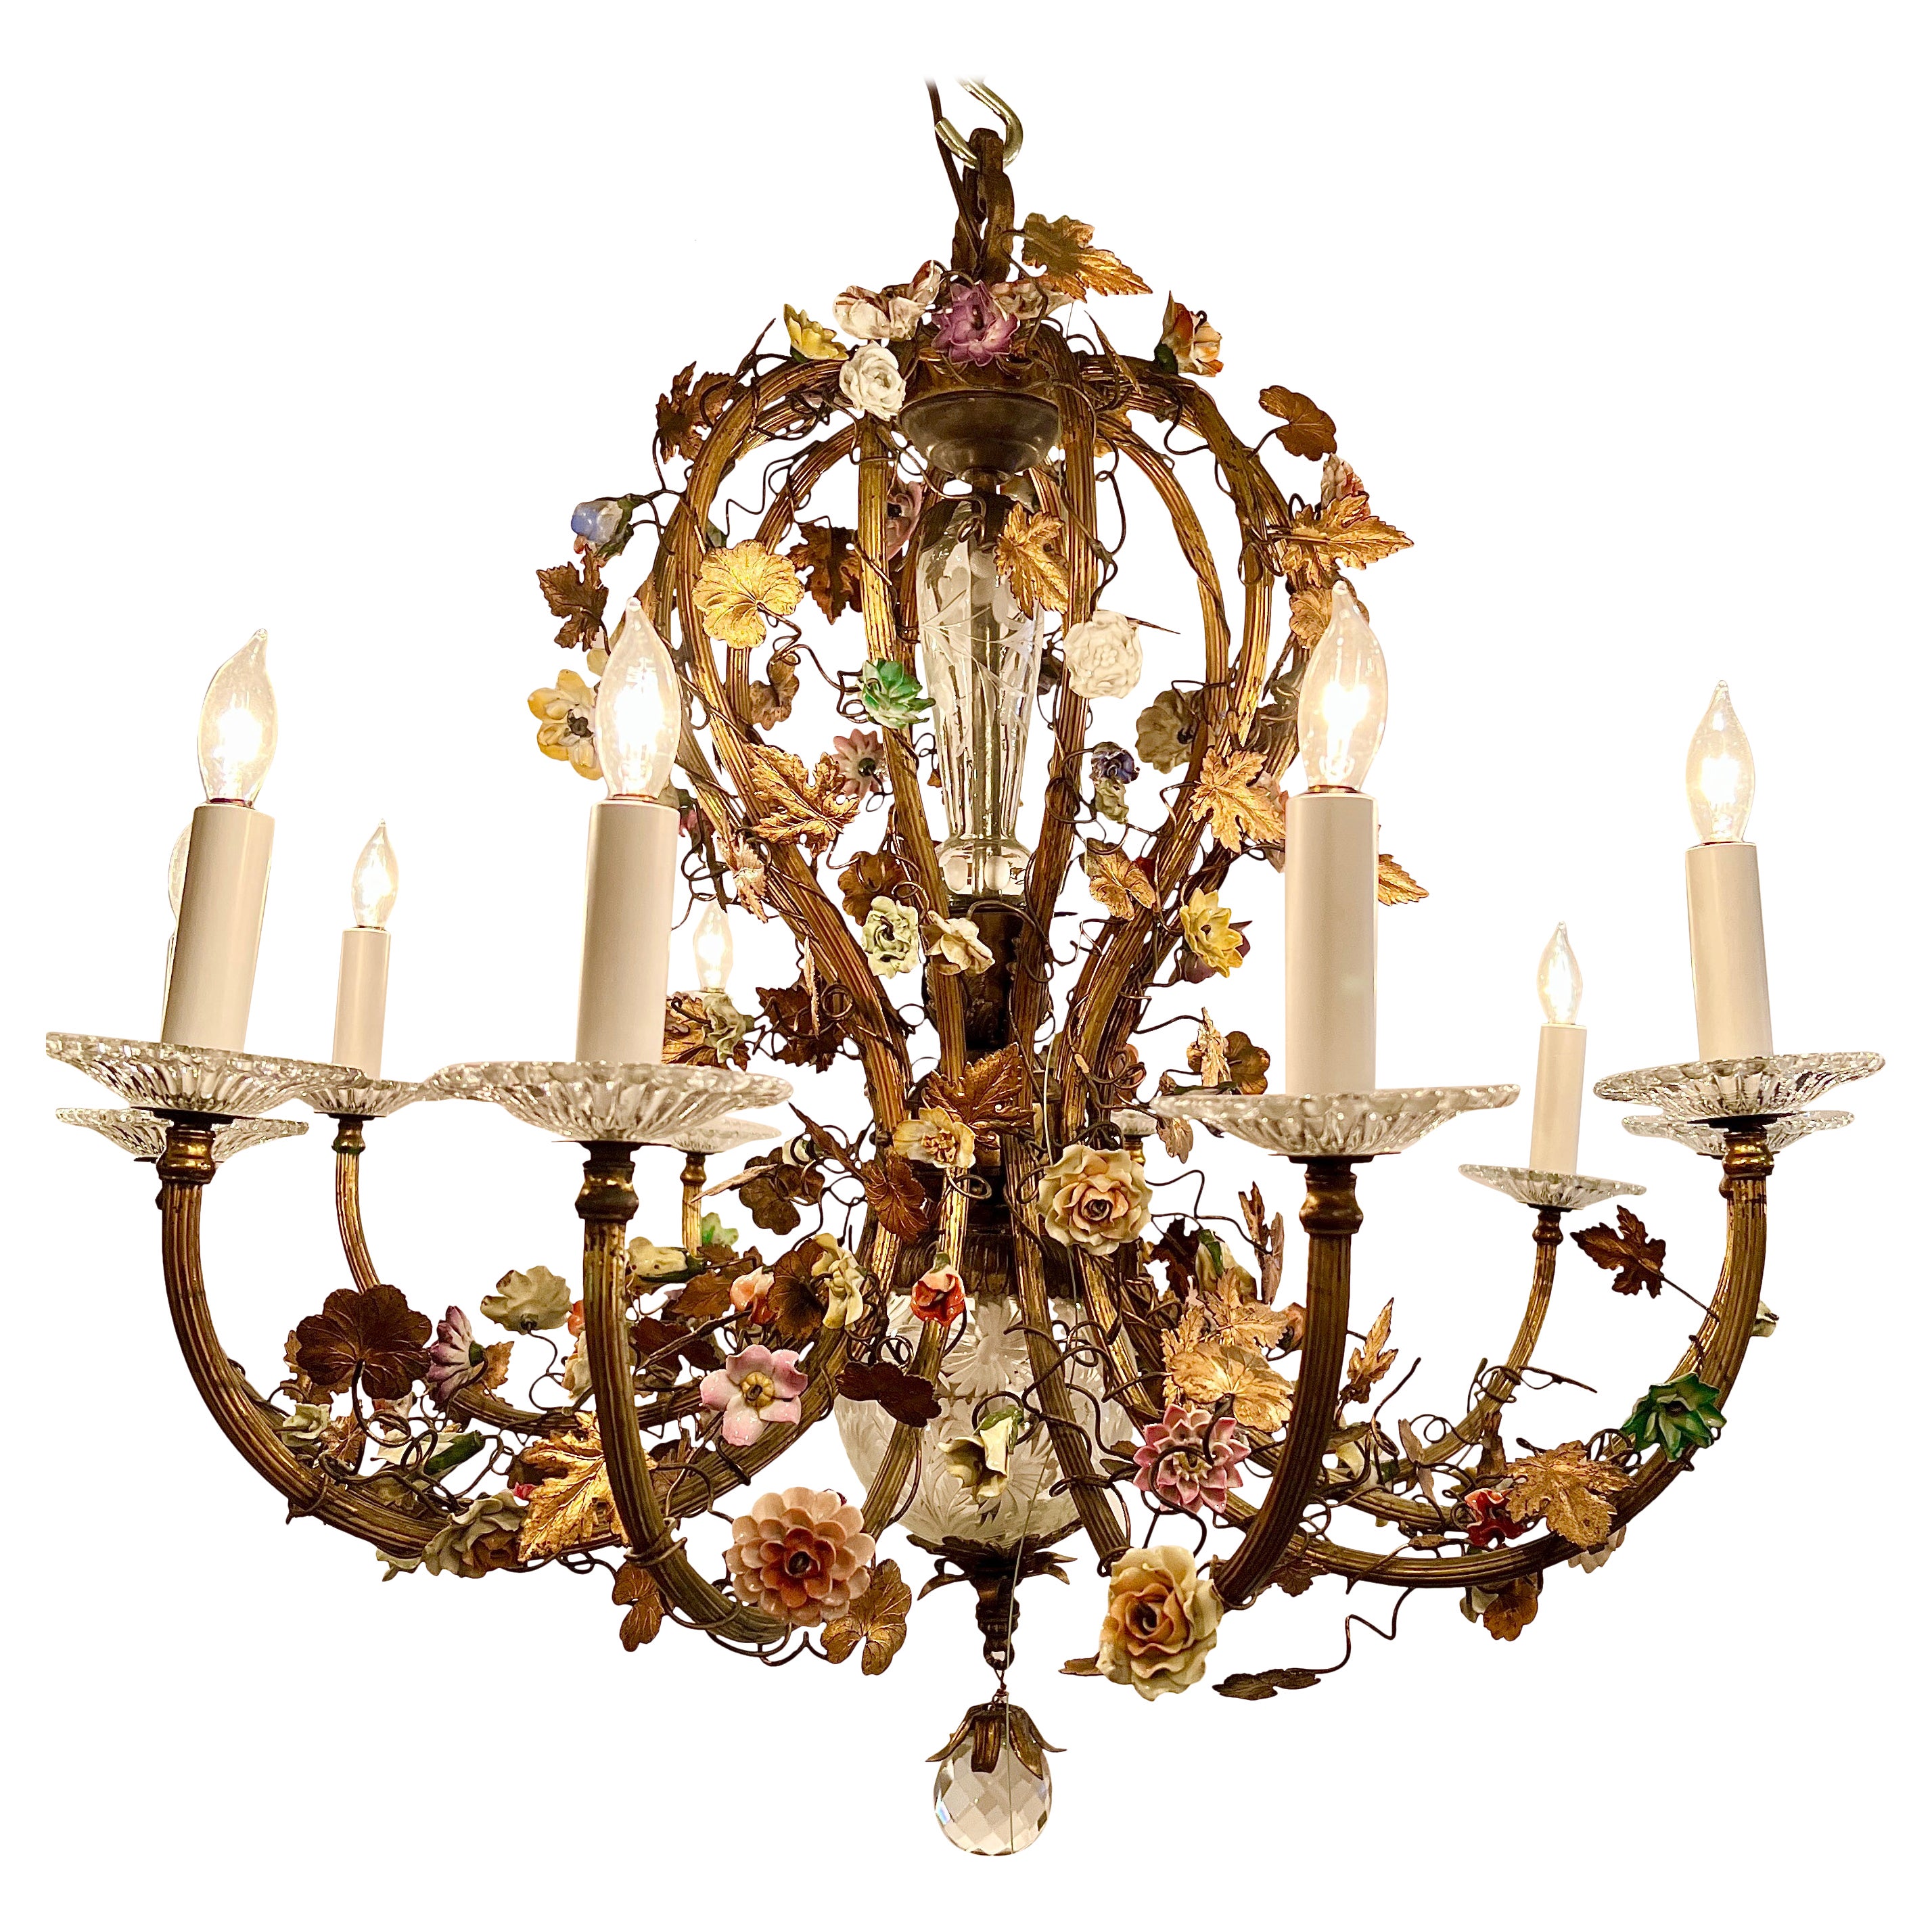 Antique French Gold Bronze Chandelier With Dresden Porcelain Flowers, Circa 1890